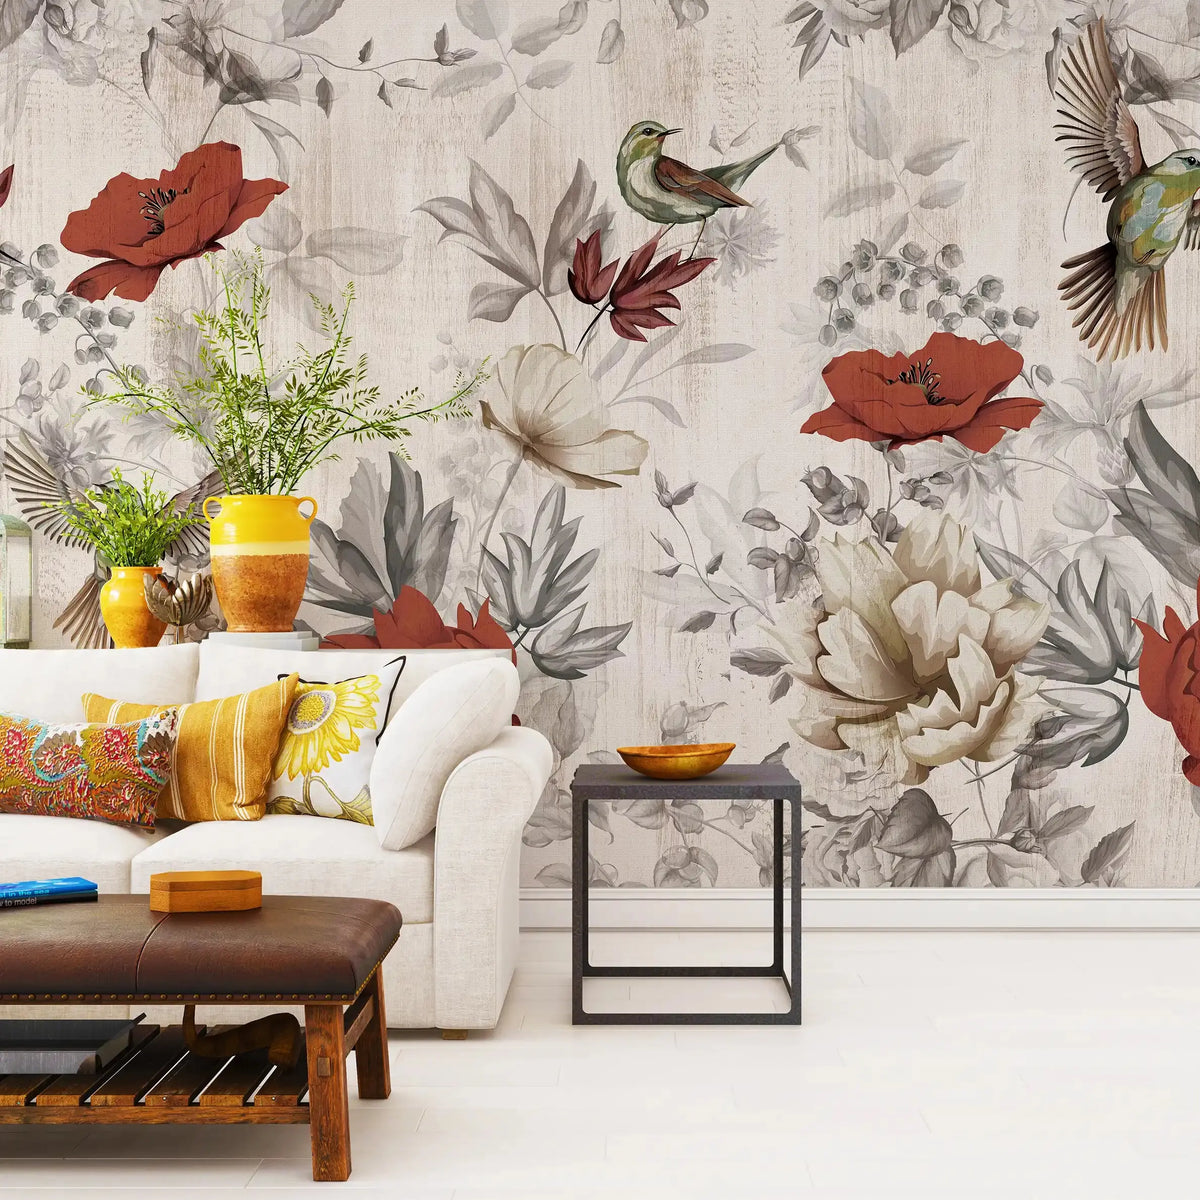 3041-B / Removable Tropical Leaf Wallpaper: Peel and Stick Vintage Red Floral Mural with Birds, Ideal for Nursery, Kitchen & Bathroom - Artevella